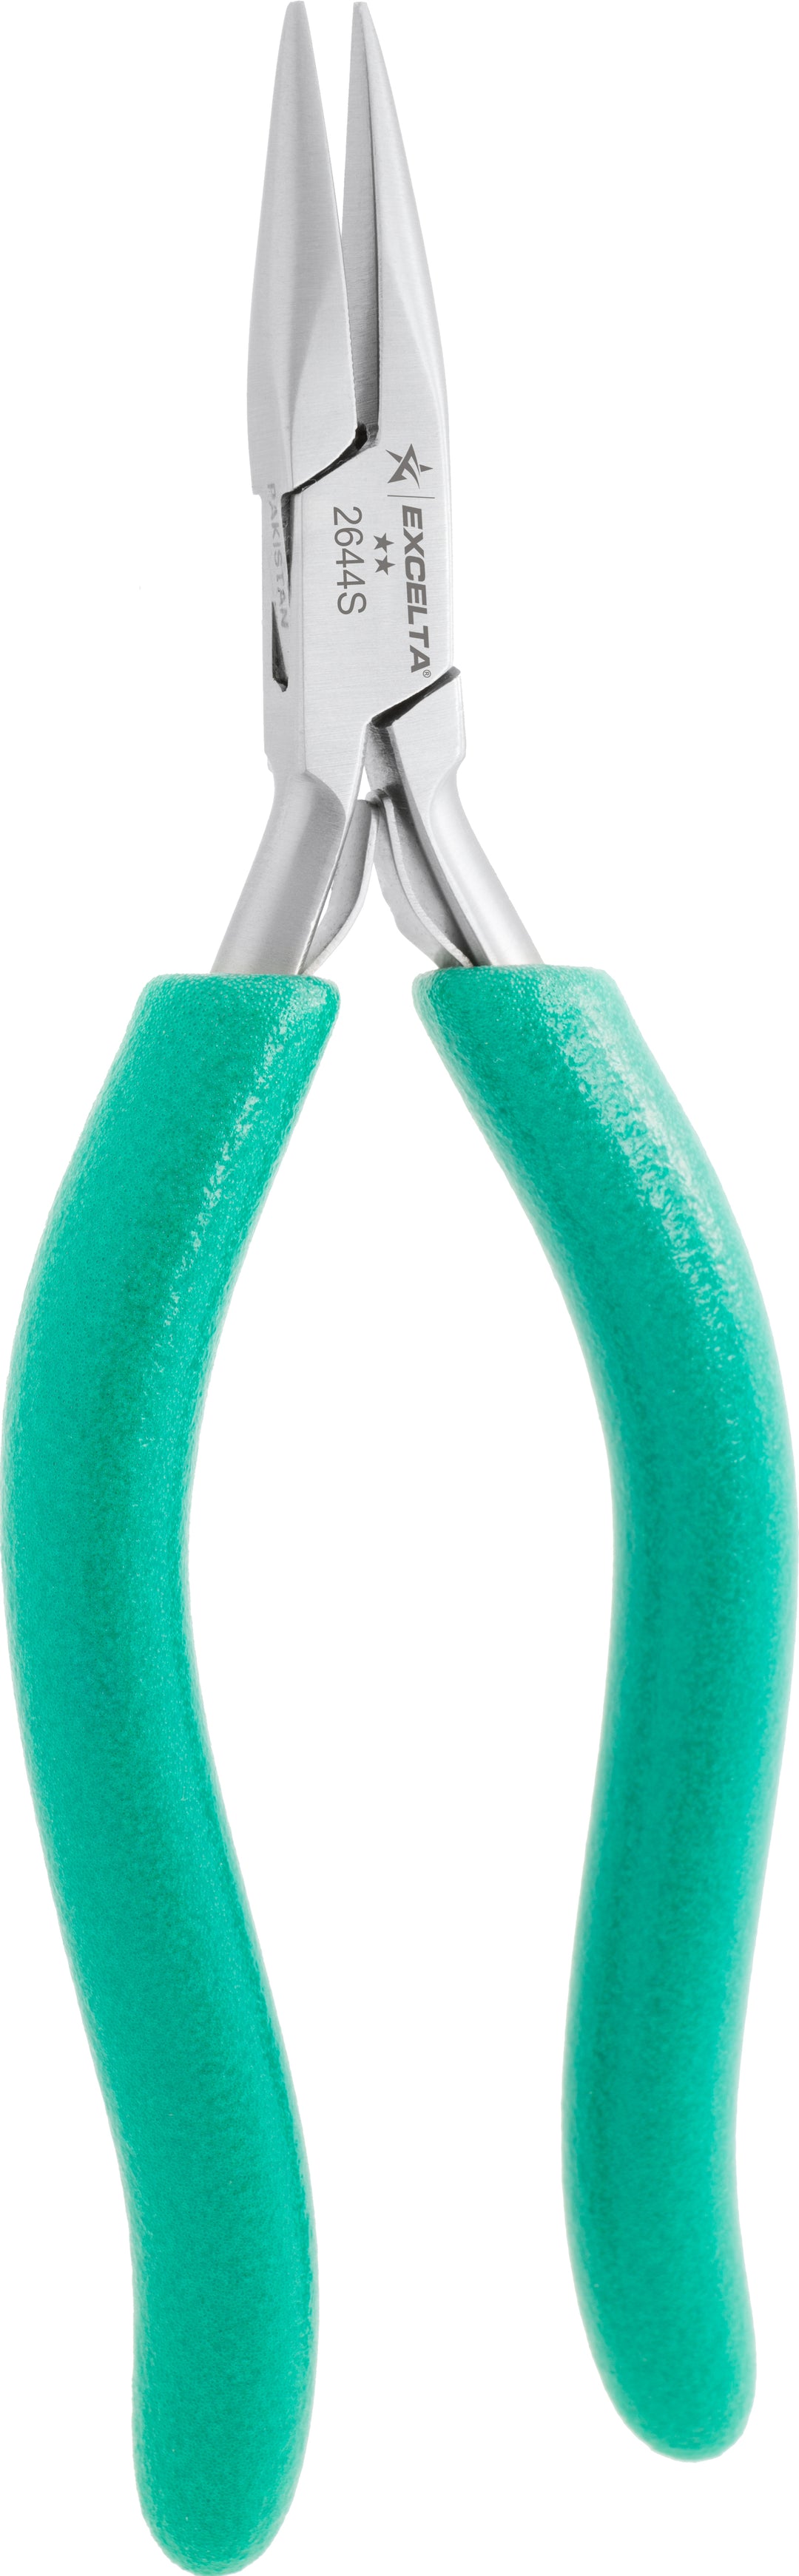 Excelta 2644S Pliers - 2 Star Small Chain Nose - SS - Long 'S' Handle